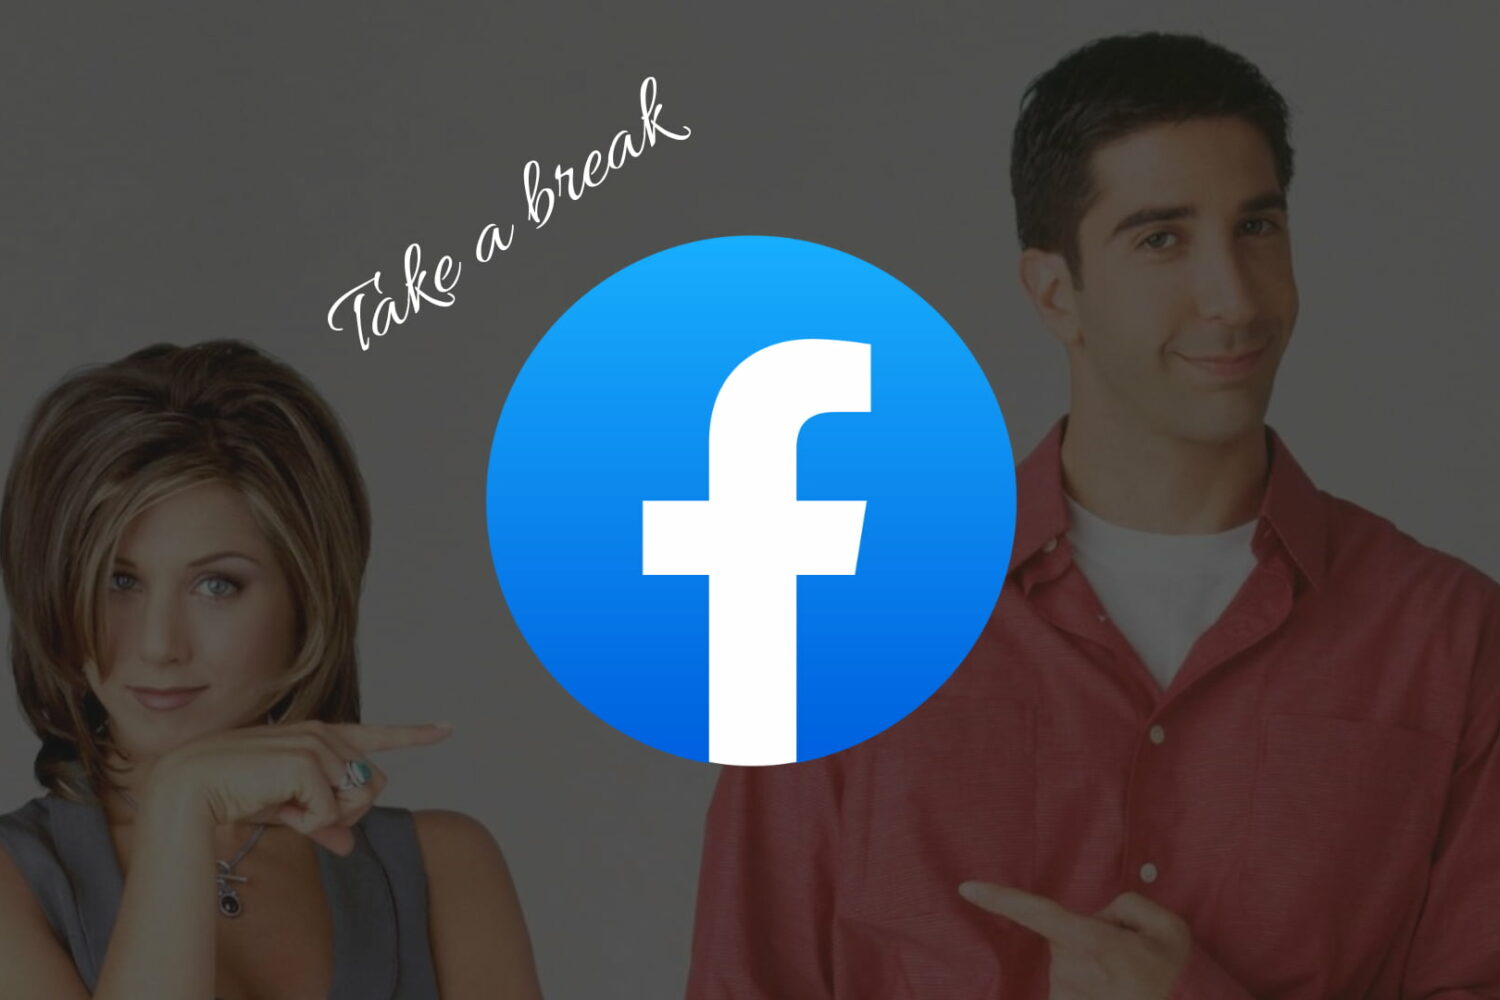 Composition with Facebook logo and the text "Take a break" with Rachel Green and Ross Geller of the famous TV show Friends in the background